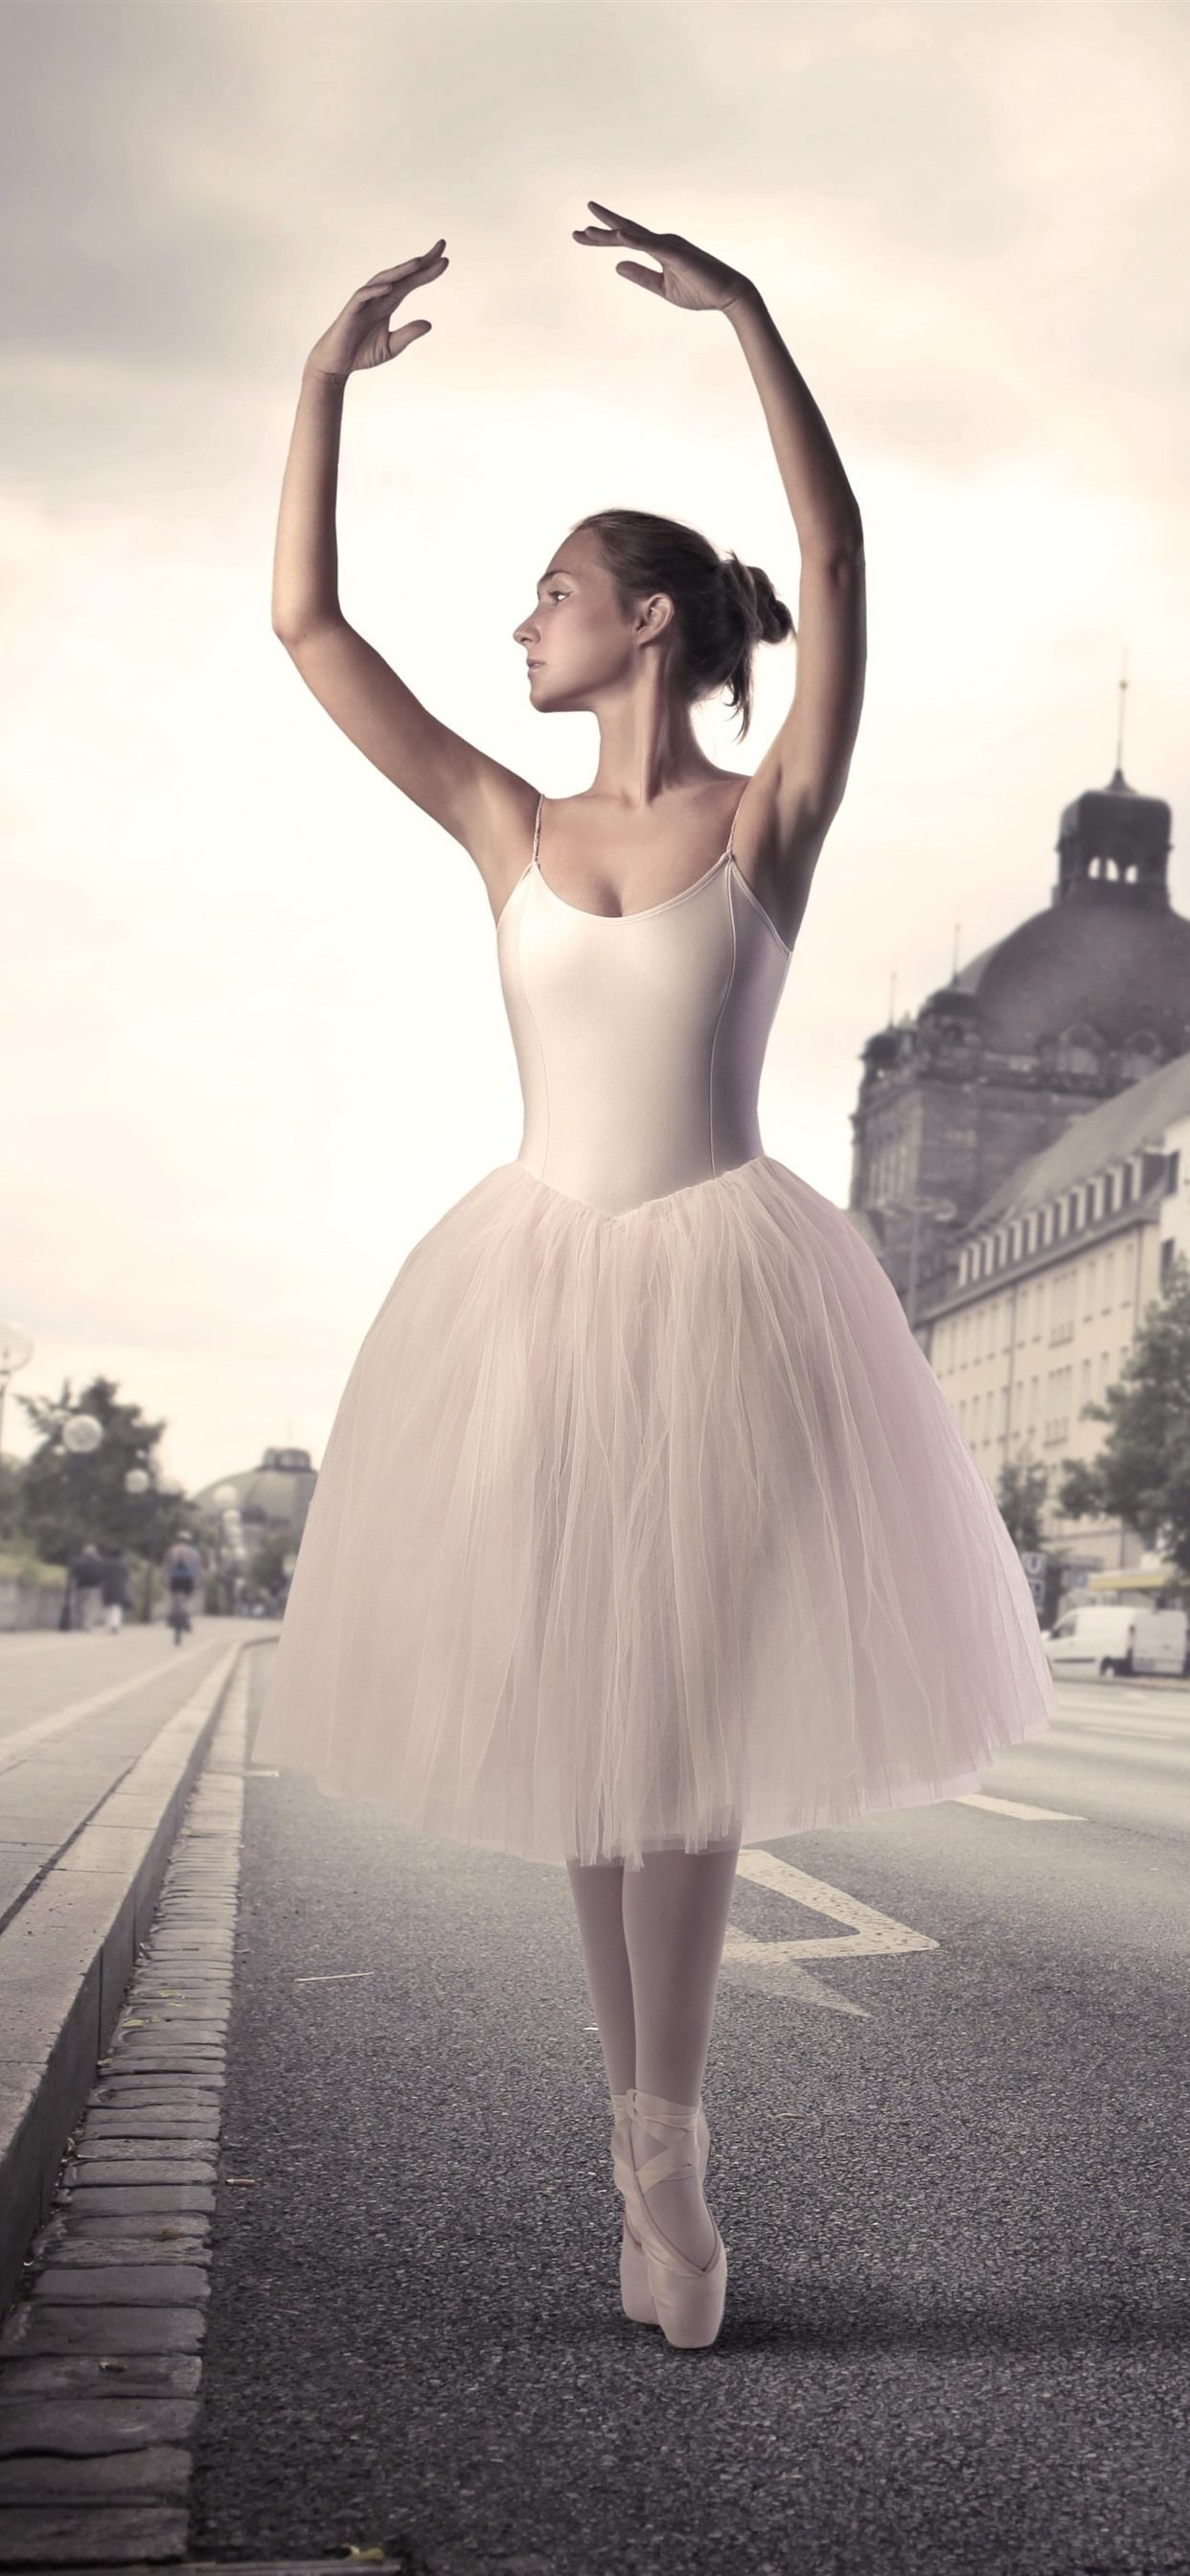 Ballet phone wallpapers, Elegant dance form, Delicate movements, Artistic mobile backgrounds, 1250x2690 HD Handy